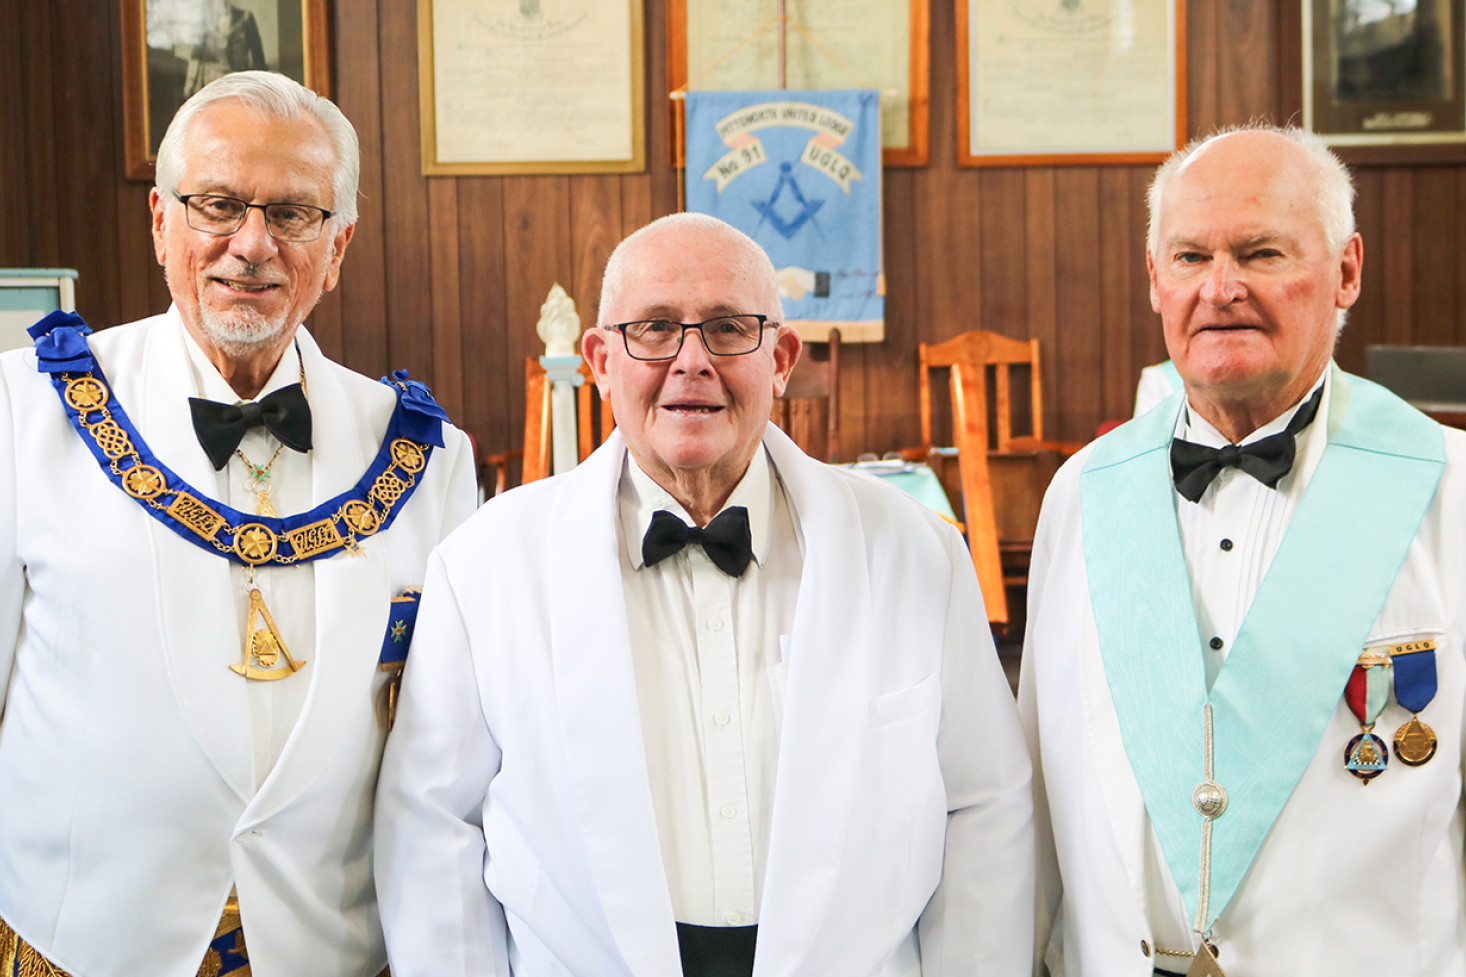 New Master installed at Pittsworth United Lodge - feature photo